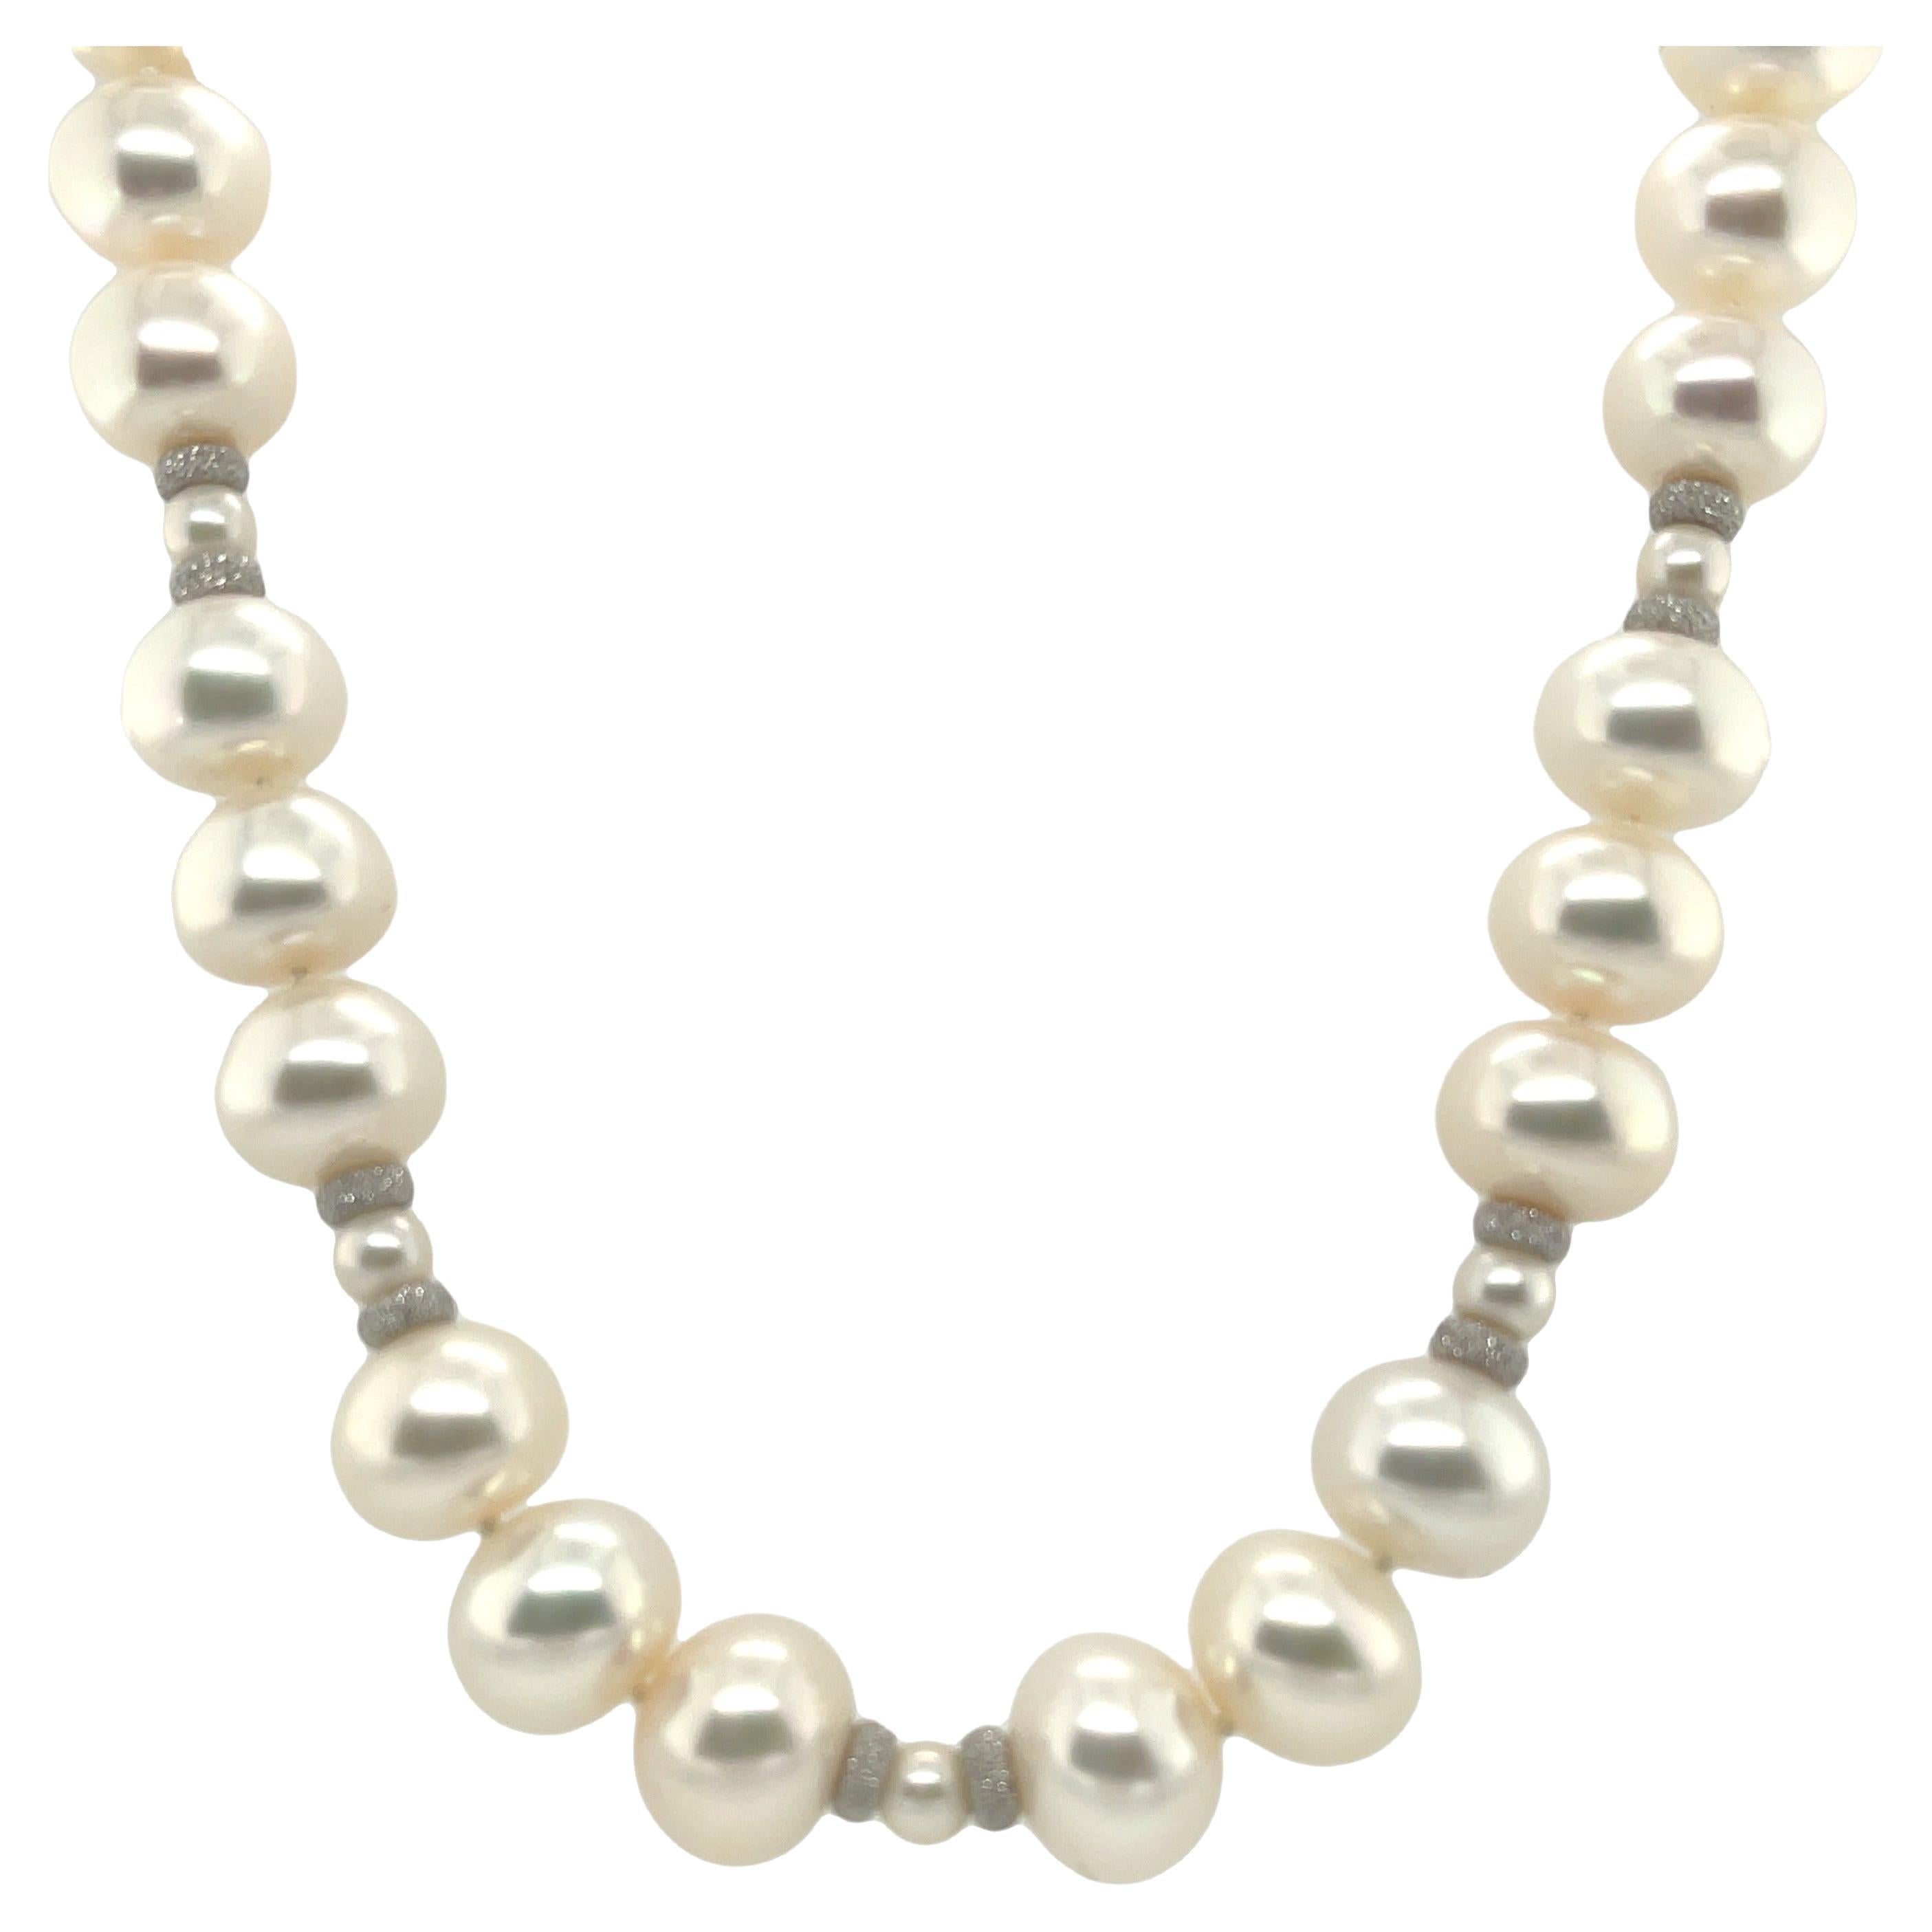 White Freshwater Pearl Necklace with White Gold Accents, 18.5 Inches